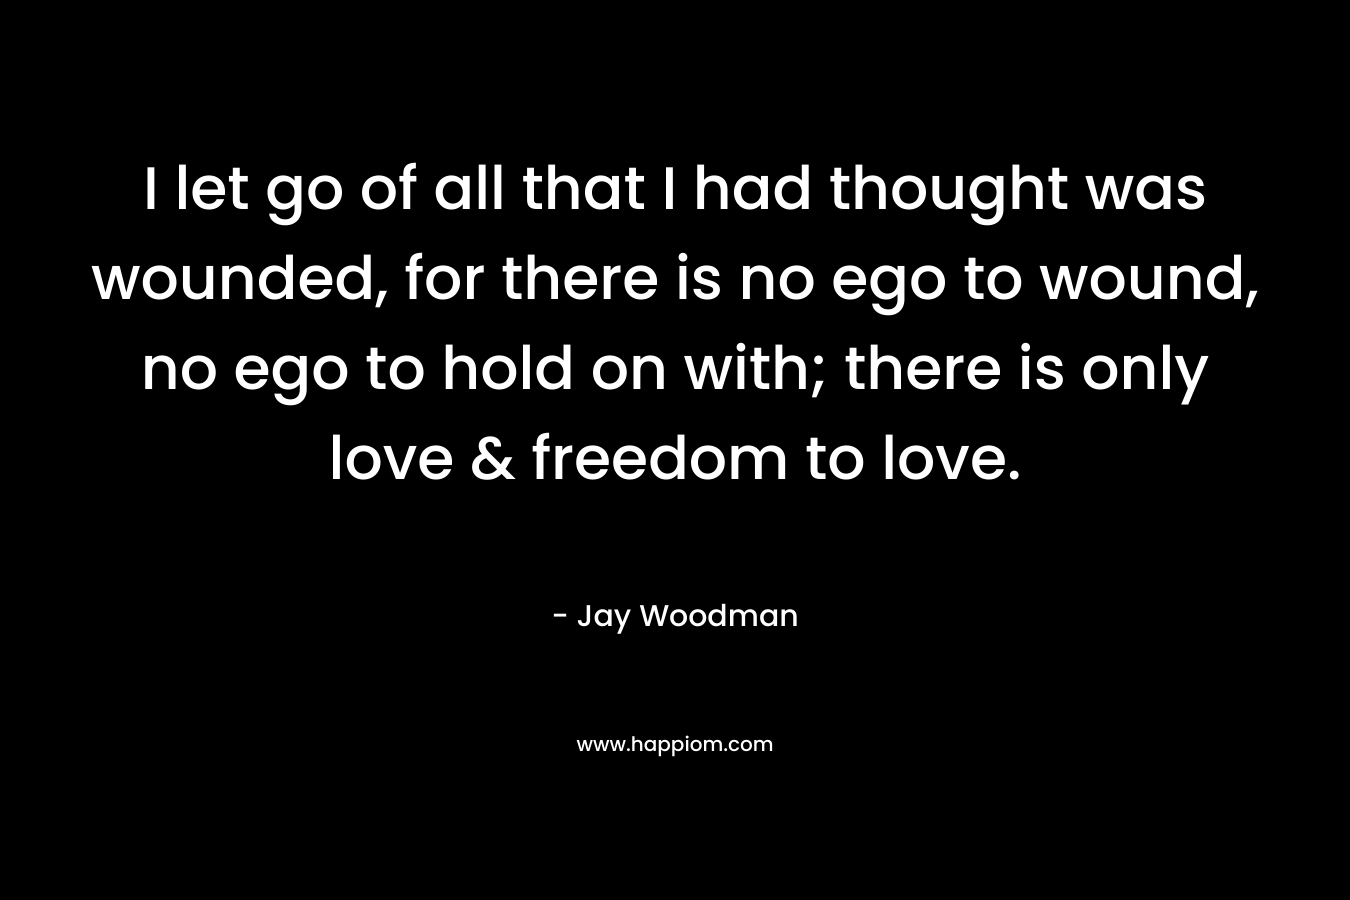 I let go of all that I had thought was wounded, for there is no ego to wound, no ego to hold on with; there is only love & freedom to love.